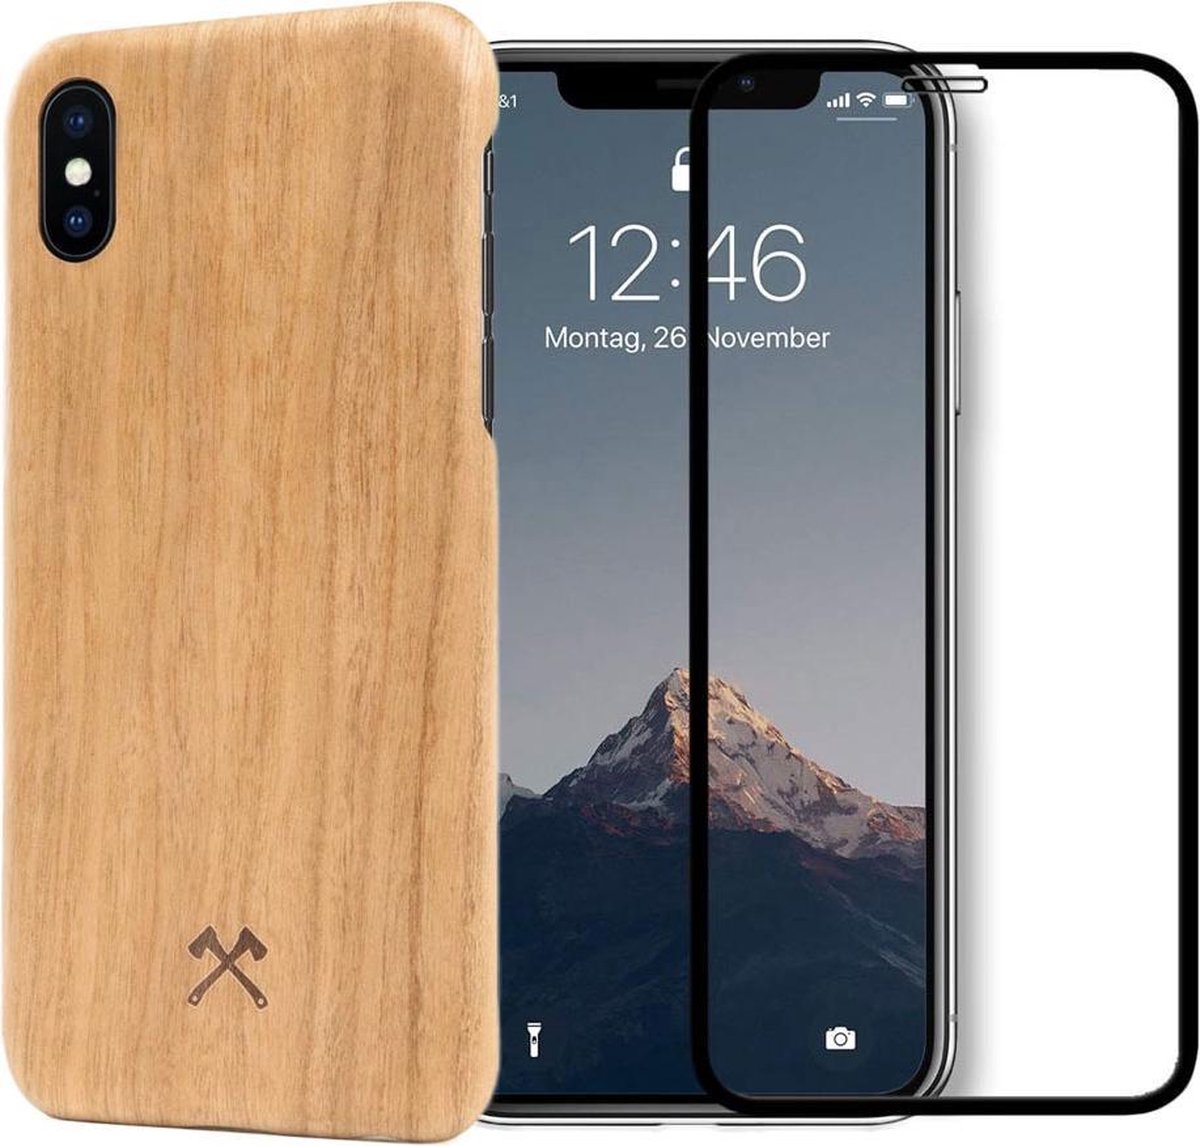 iPhone Xs Max hoesje - Woodcessories - Kersenhout - Hout